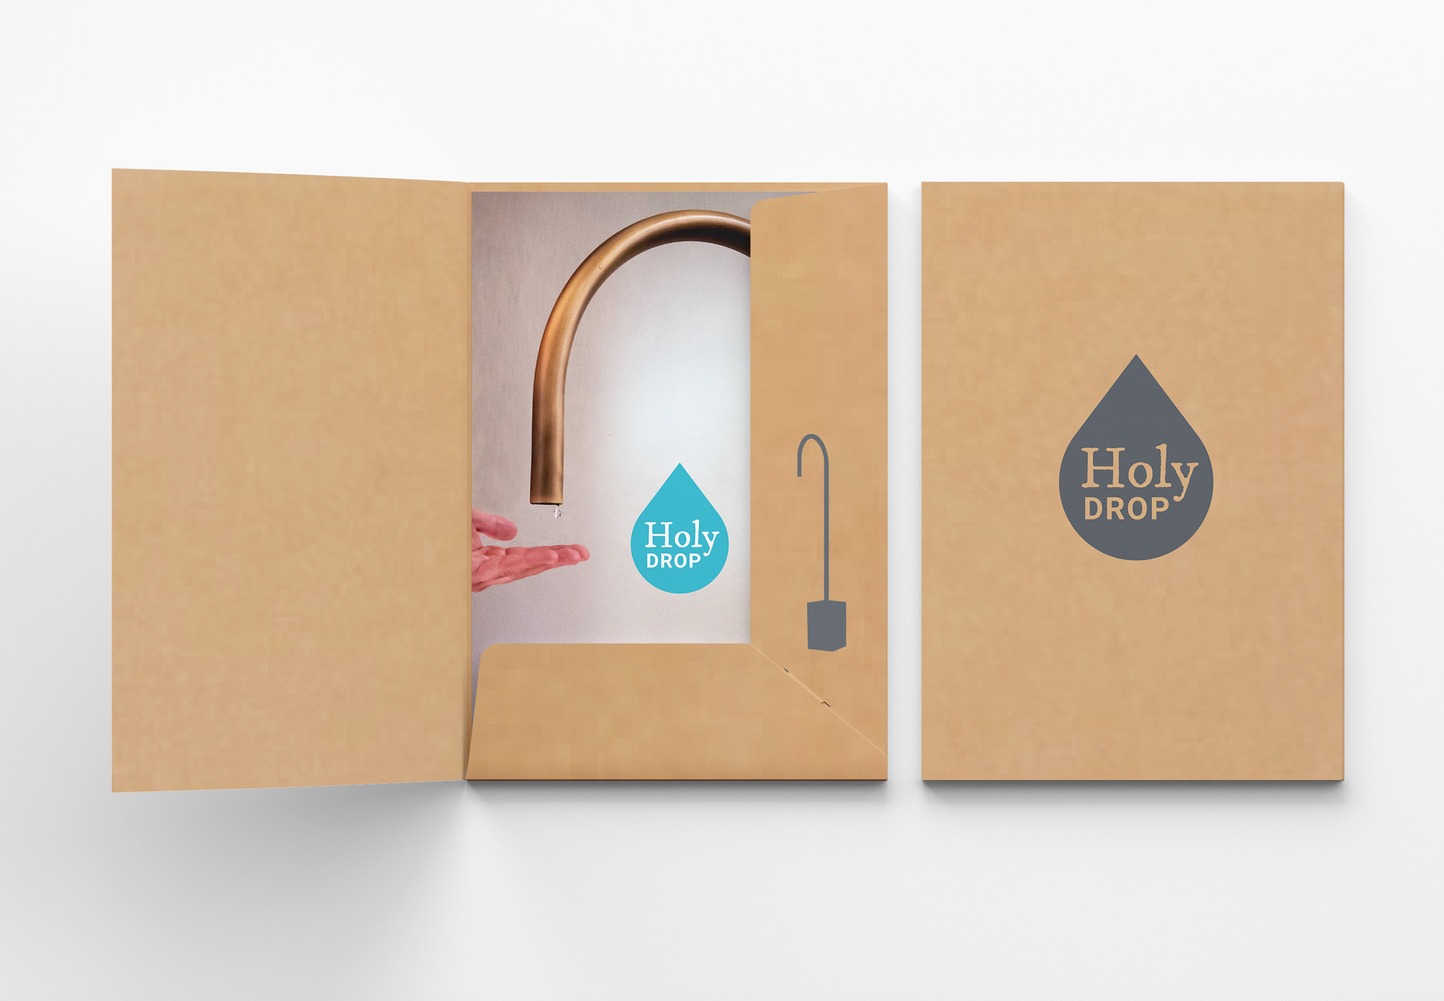 Holy Drop - acquasantiera automatica / automatic holy water dispenser